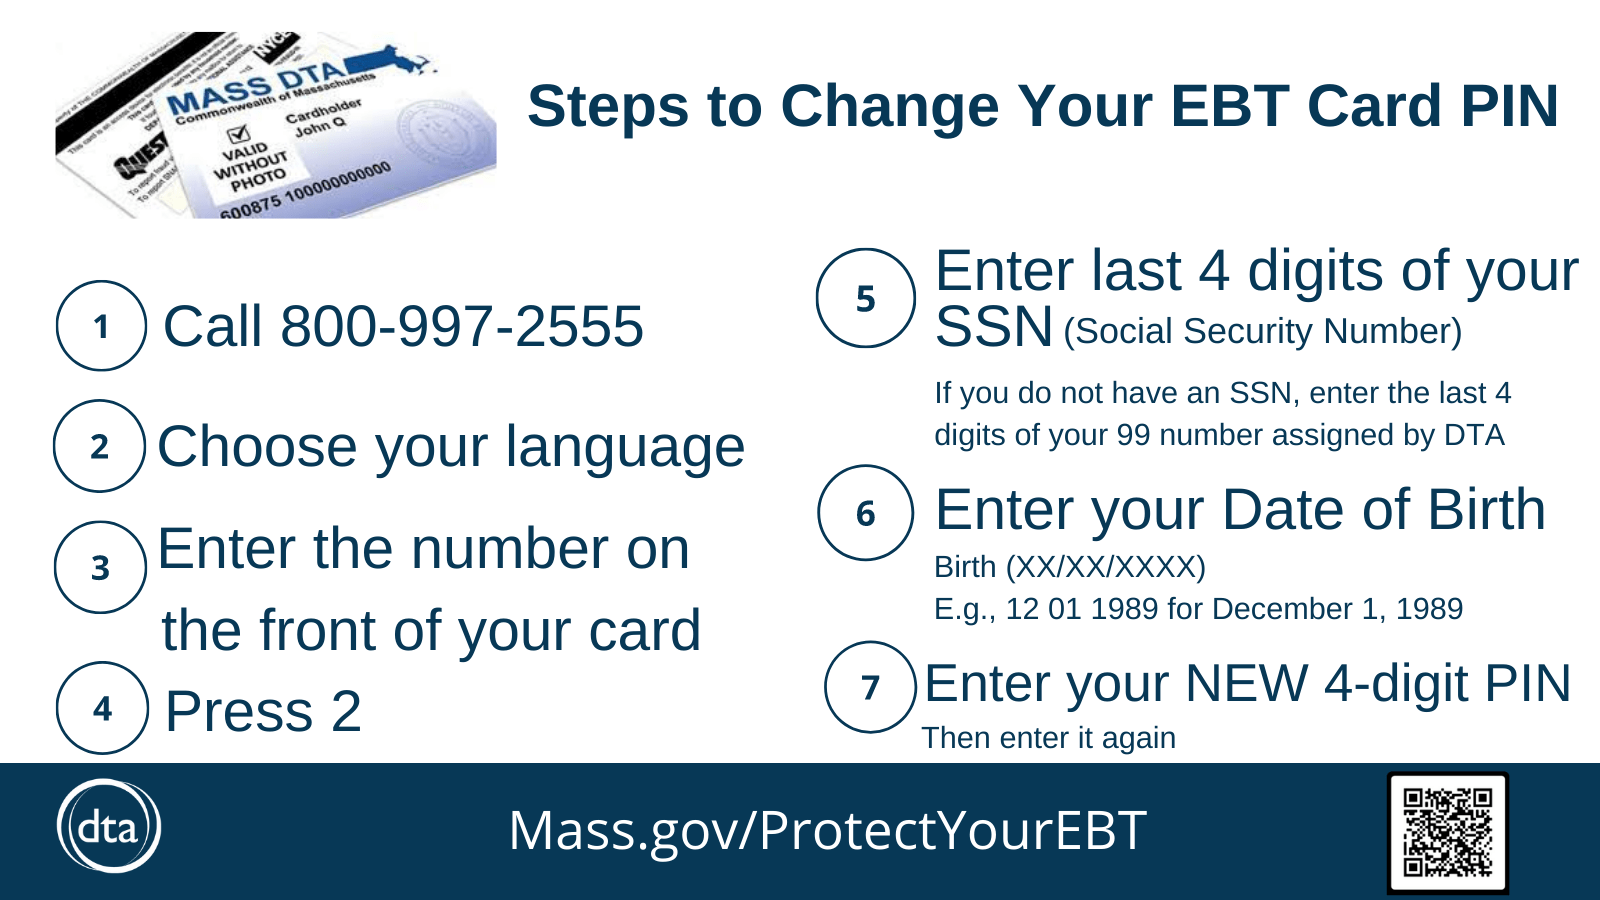 Help share step by step instructions on how to change an EBT card PIN.